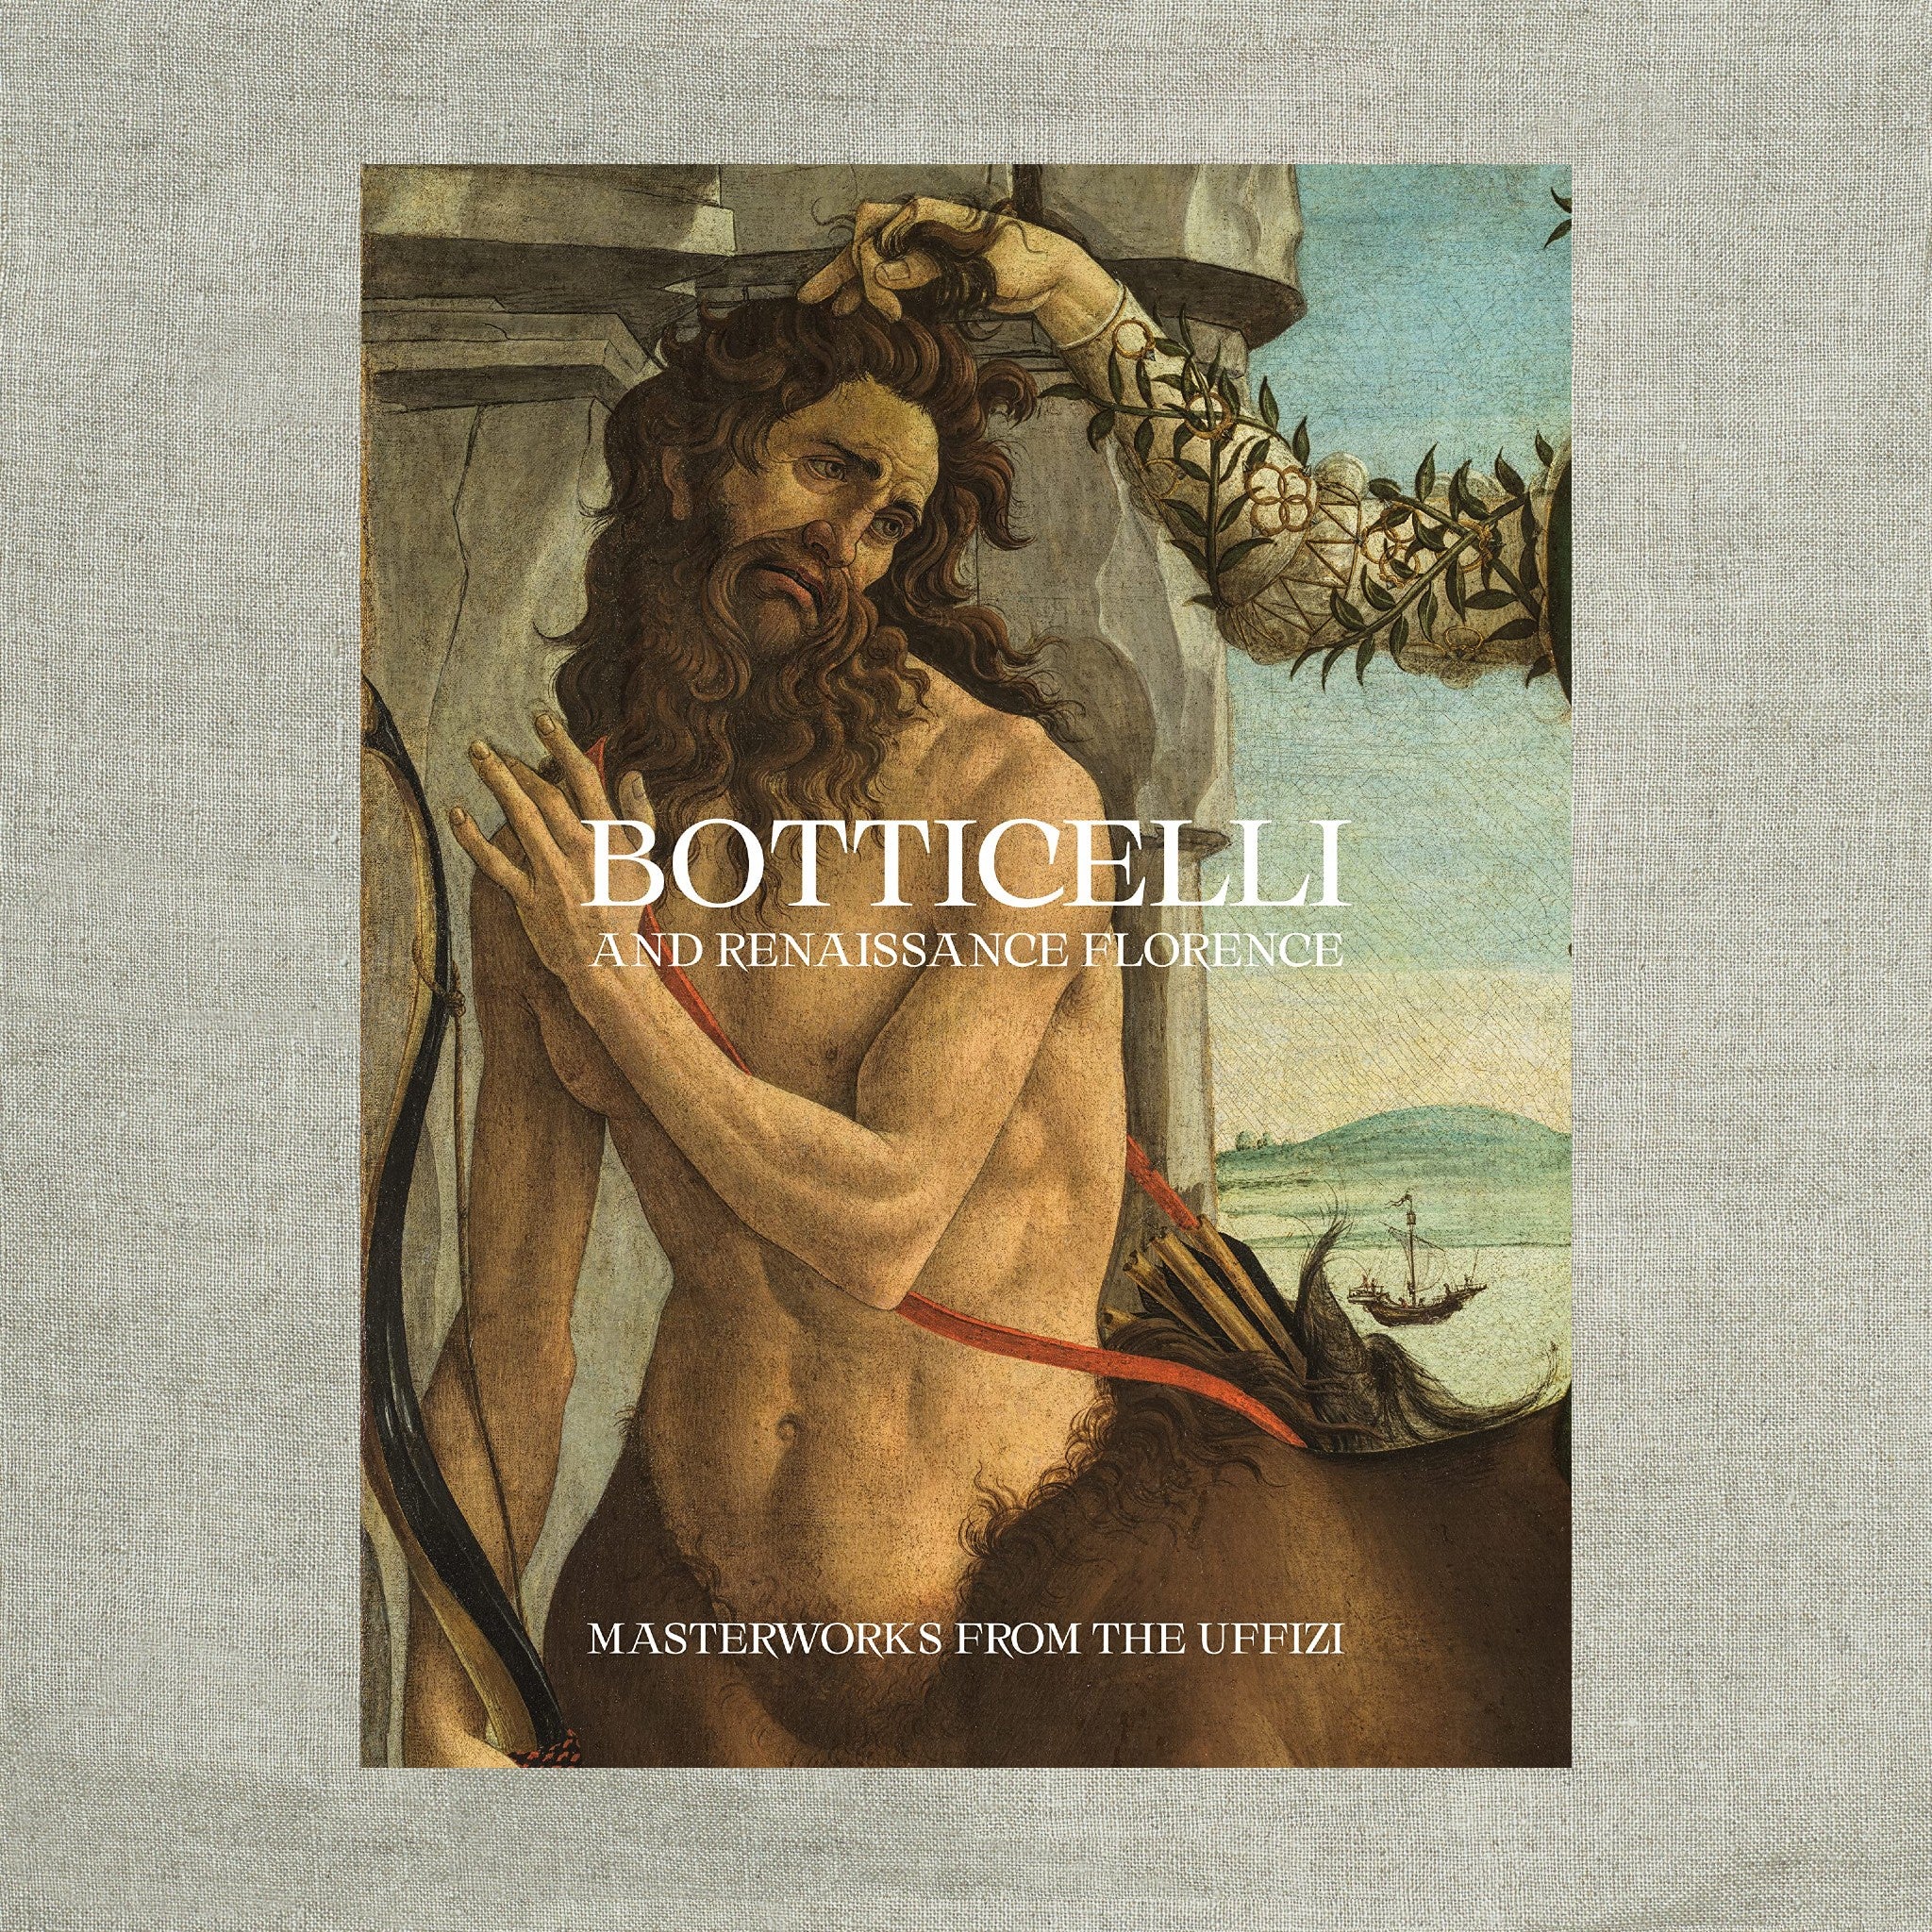 Download The Birth of Venus by Botticelli Wallpaper  Wallpaperscom